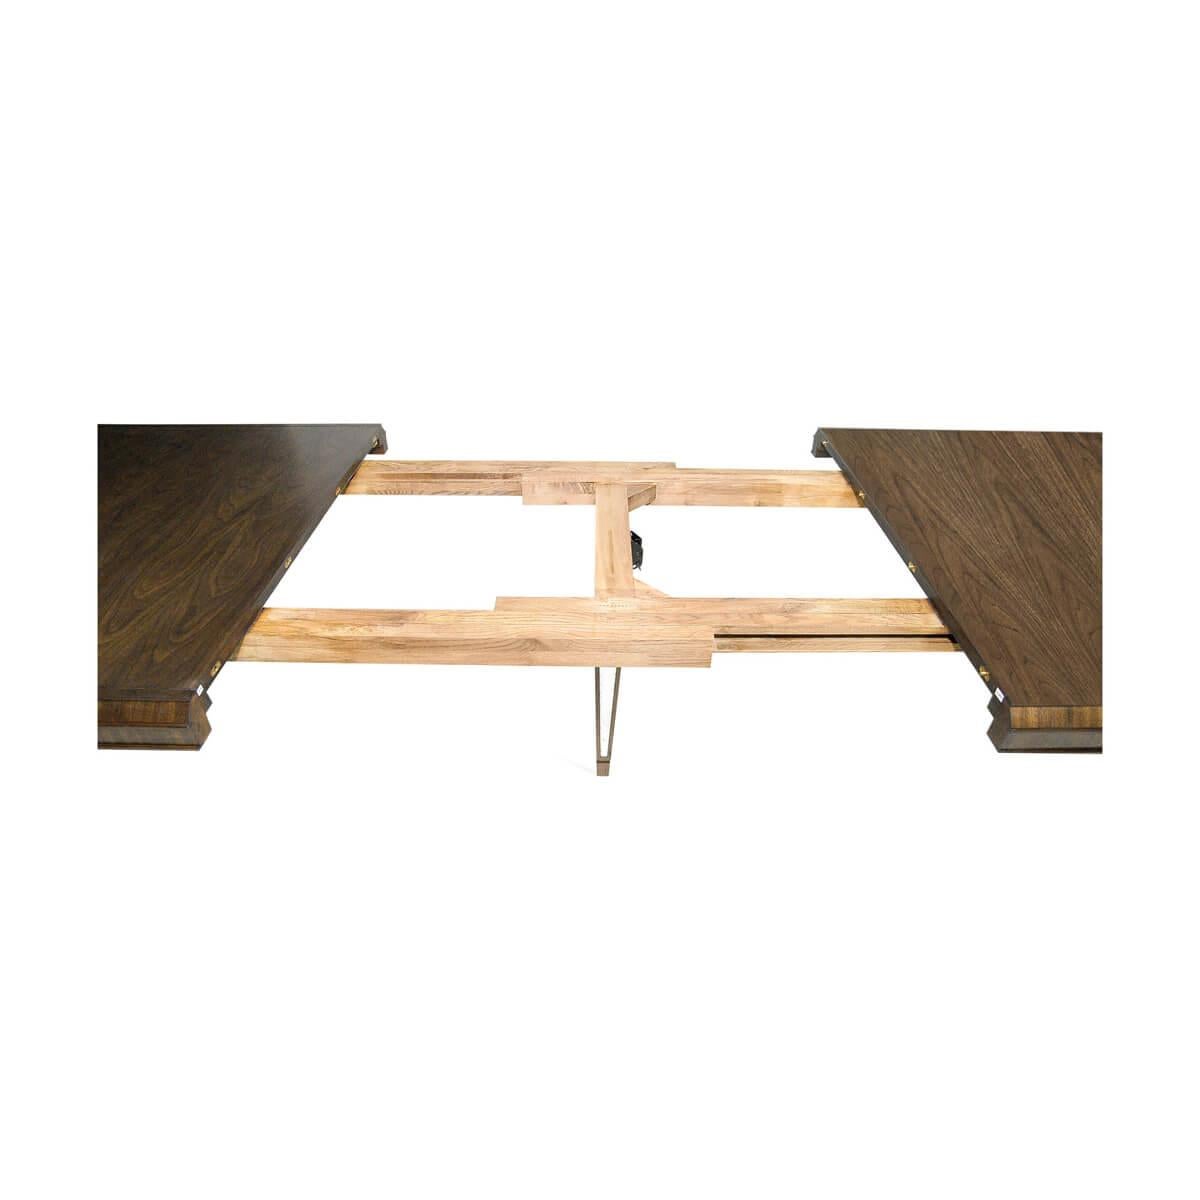 Vietnamese Art Deco Walnut Extension Dining Table For Sale